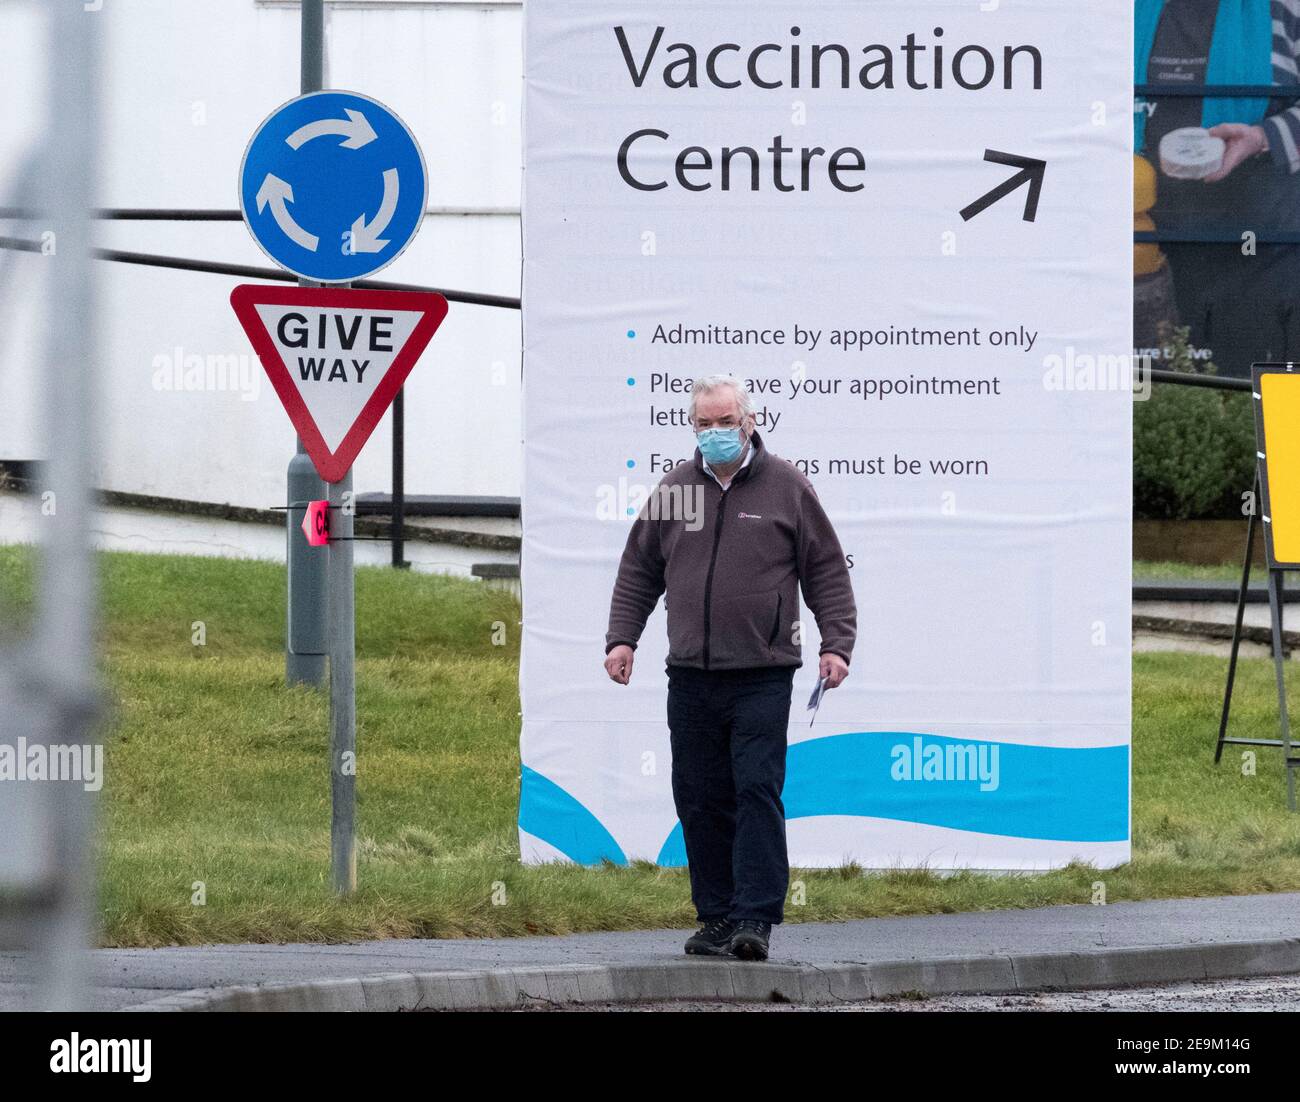 Scotland, UK. 5th February 2021. Member of the public at the covid 19 vaccination centre, Royal Highland Centre, Ingliston, Edinburgh    Credit: Ian Rutherford/Alamy Live News. Stock Photo